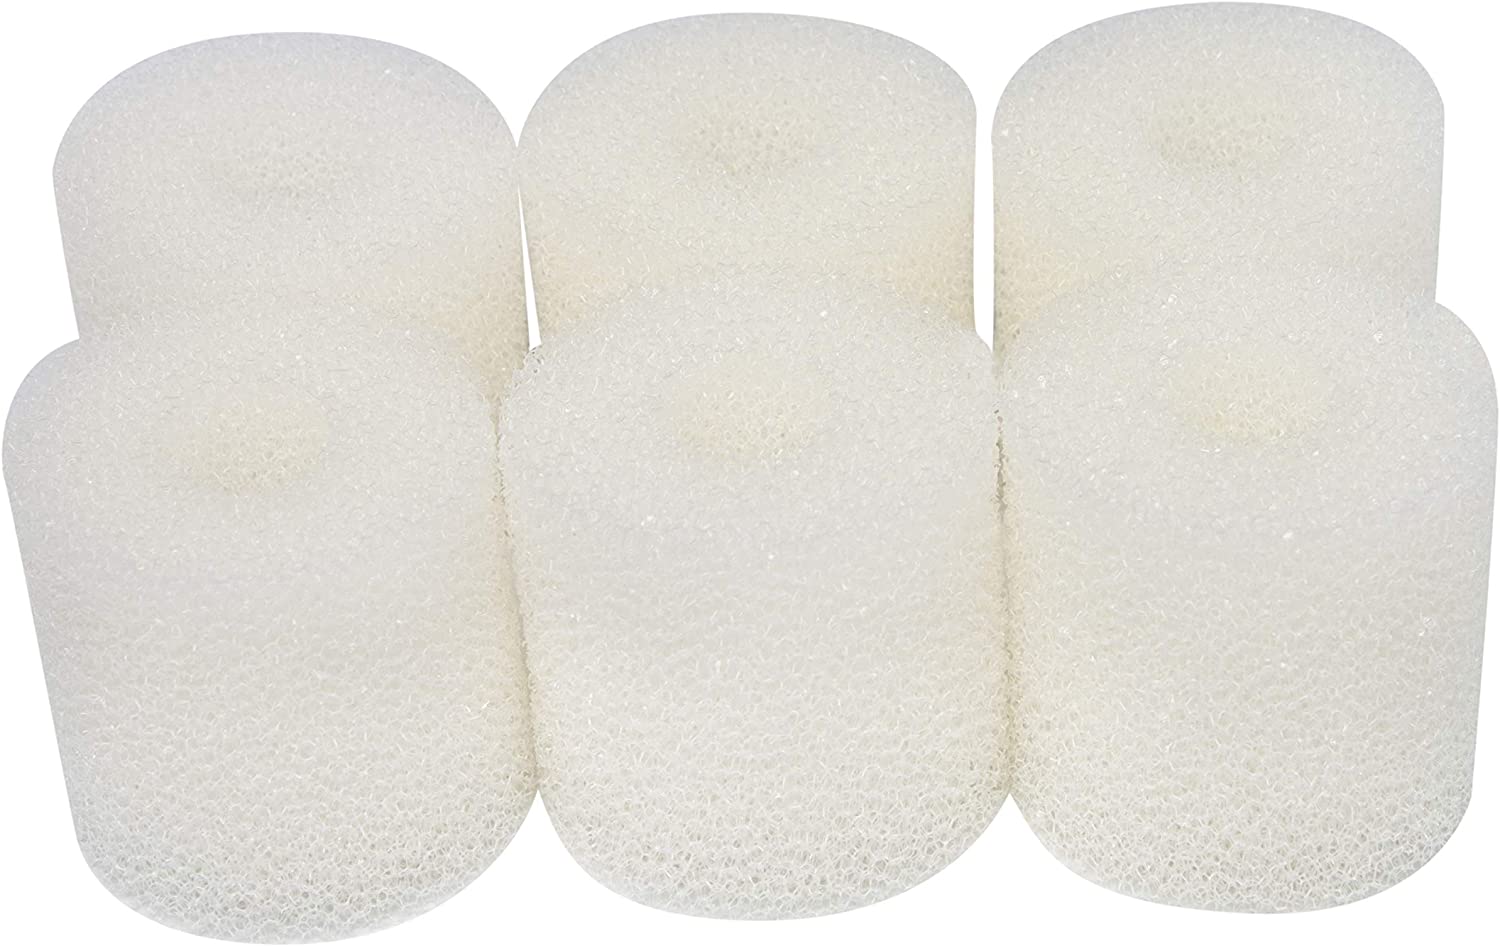 LTWHOME Foam Filter fit for 2618080 Cartridges Aquaball 2208-2212/60-180,Biopower 160-240 and Prefilter 4004320 (Pack of 6)